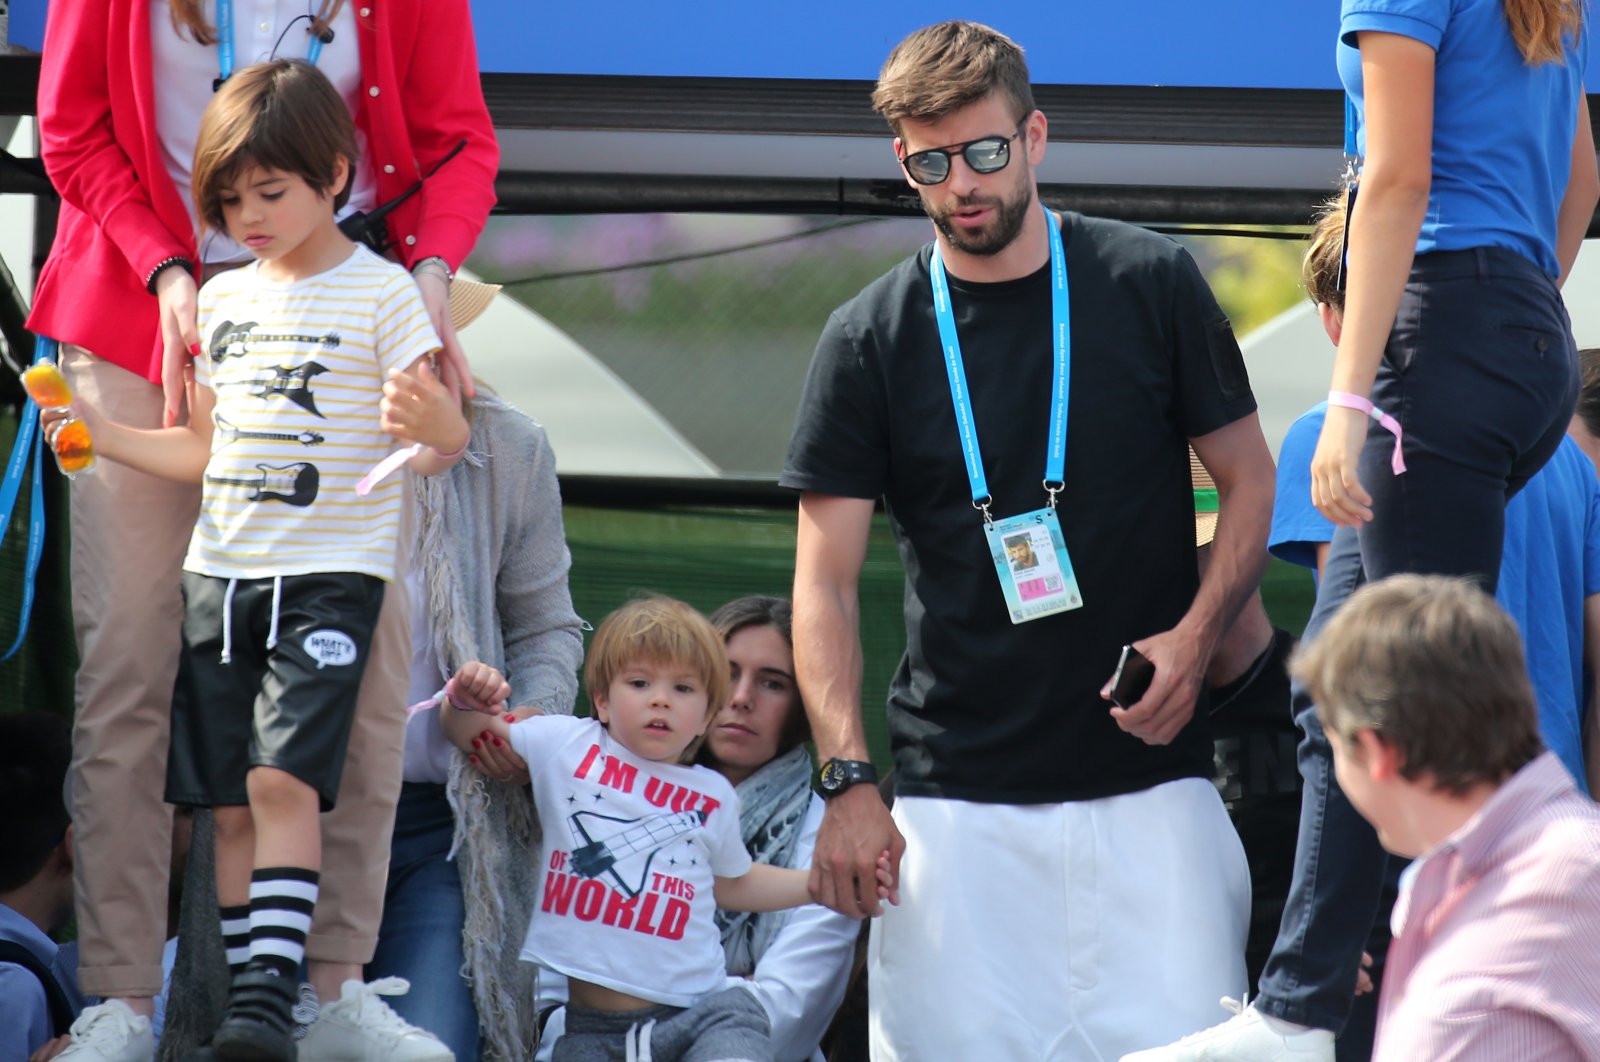 Gerard Pique (R) with his kids Milan and Sacha during the match Rafa Nadal versus David Goffin at the Barcelona Open Banc Sabadell, Barcelona, Spain, April 28, 2018. (Getty Images Photo)